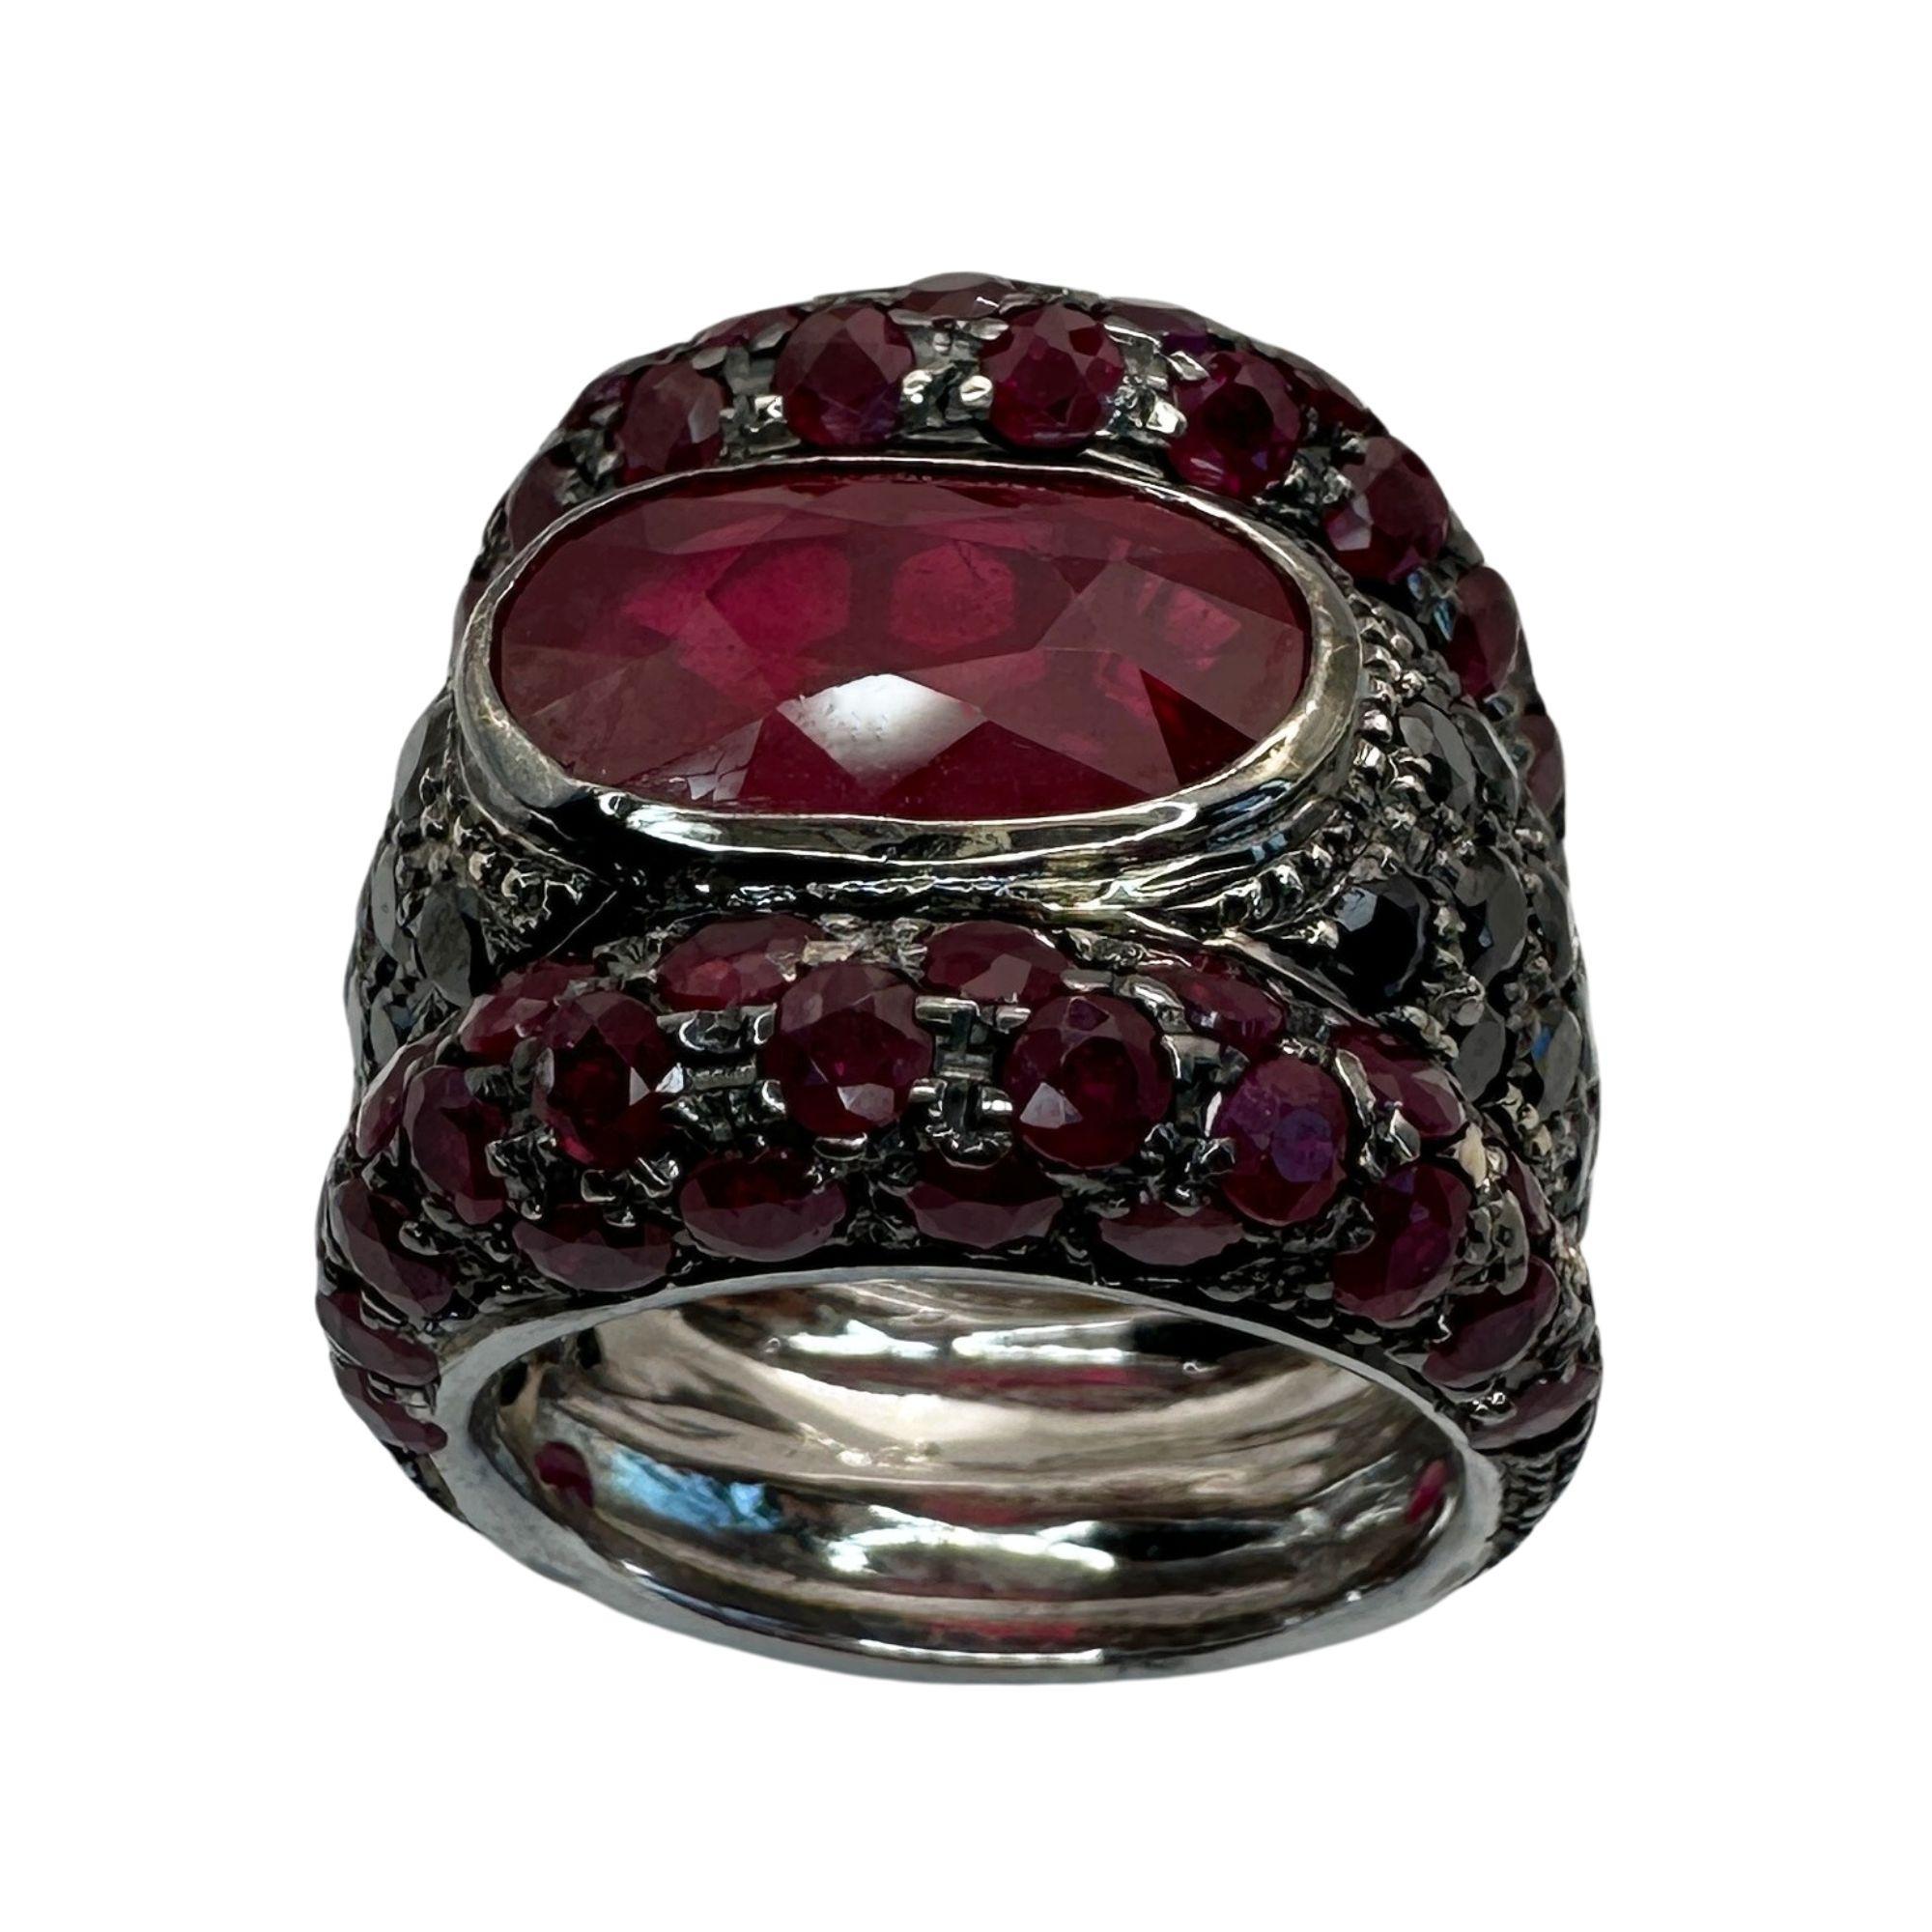 Indulge in ultimate luxury with our exquisite 18k Black Diamond, African Ruby, and Ruby Ring. Crafted from 18k white gold and weighing 18.1 grams, this ring boasts 3.05 carats of black diamonds, 7.16 carats of African ruby, and 7.29 carats of ruby